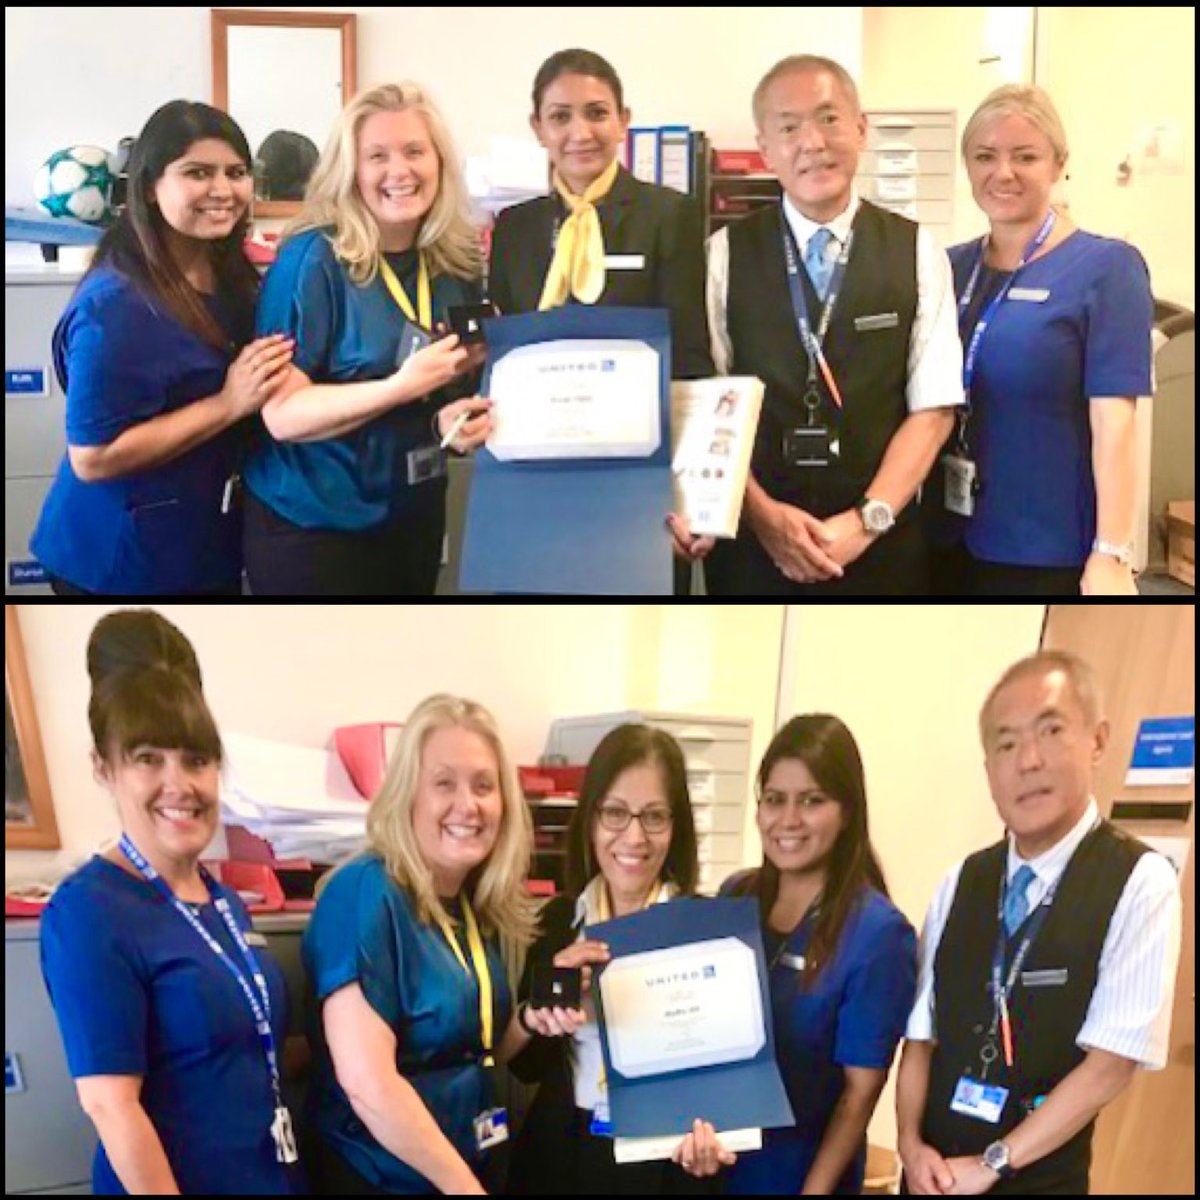 A wonderful celebration of 20yrs combined service @LHR PS today. Both our hardworking PSR’s Kiran & Madhu started on the same day 10yrs ago & celebrated together today. Well done on your milestone both of you. #BeingUnited @WeAreUnited @marisaatunited @aaronsmythe @ammyheathrow